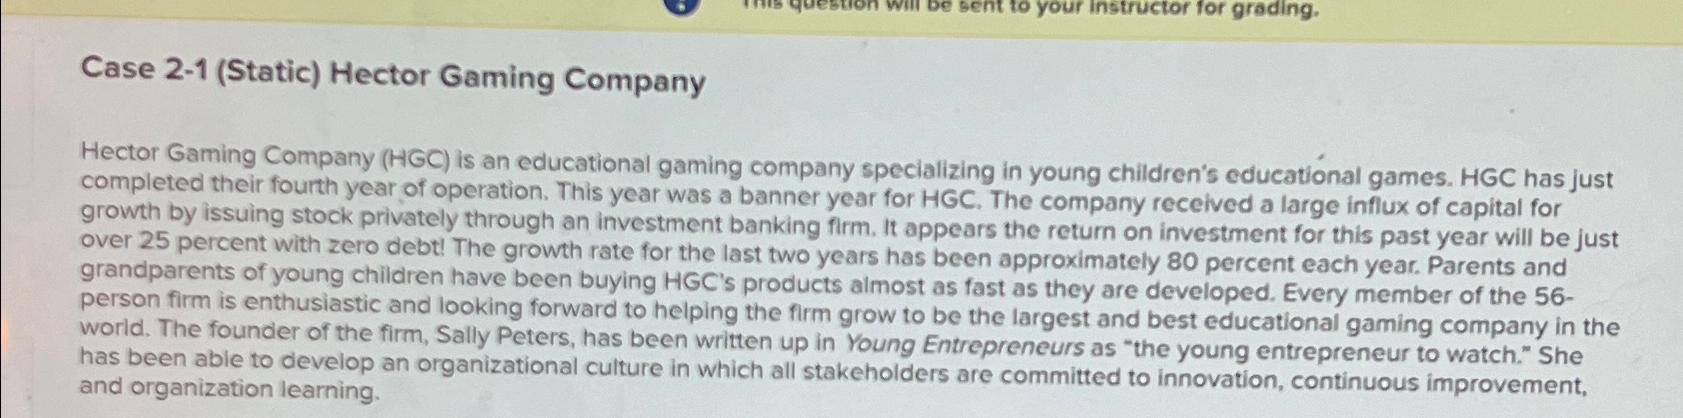 hector gaming company case study